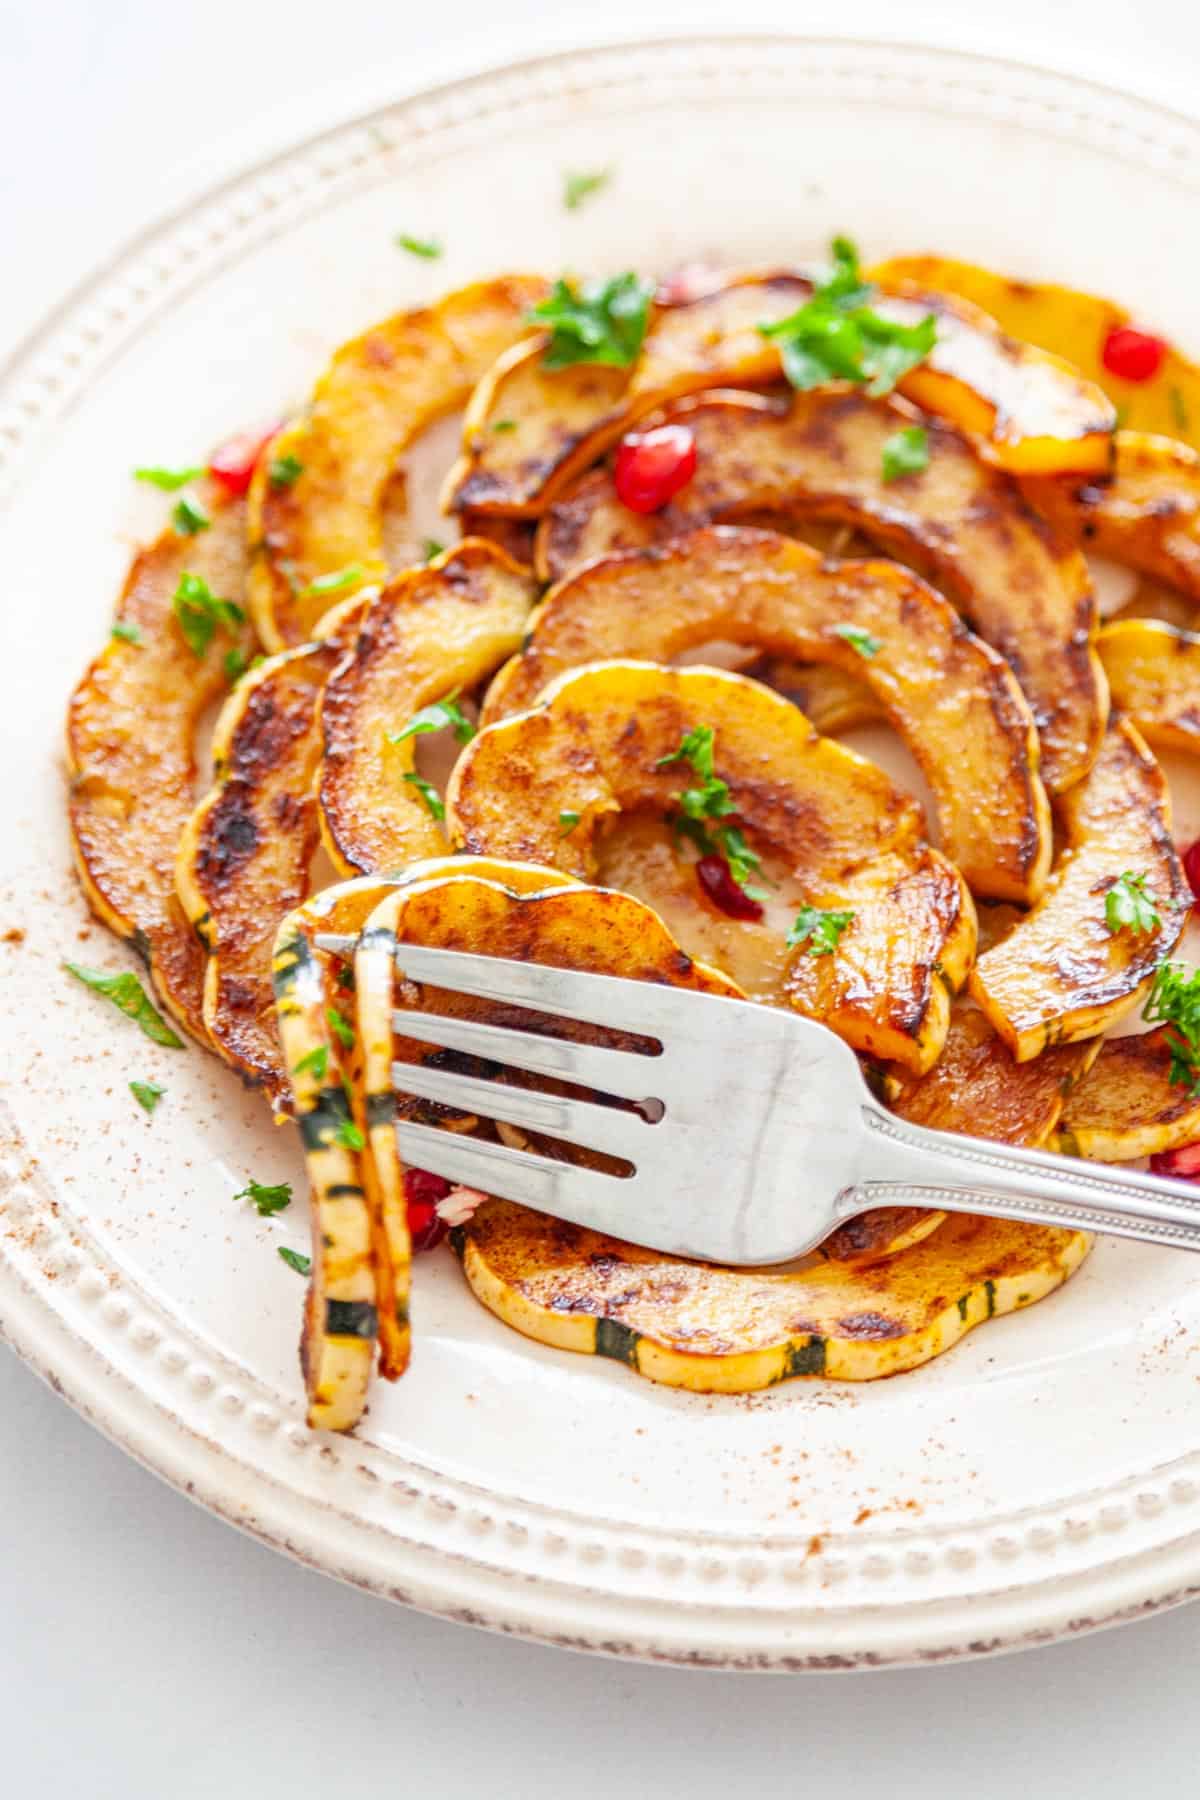 A fork spearing slices of delicata squash on a plate.